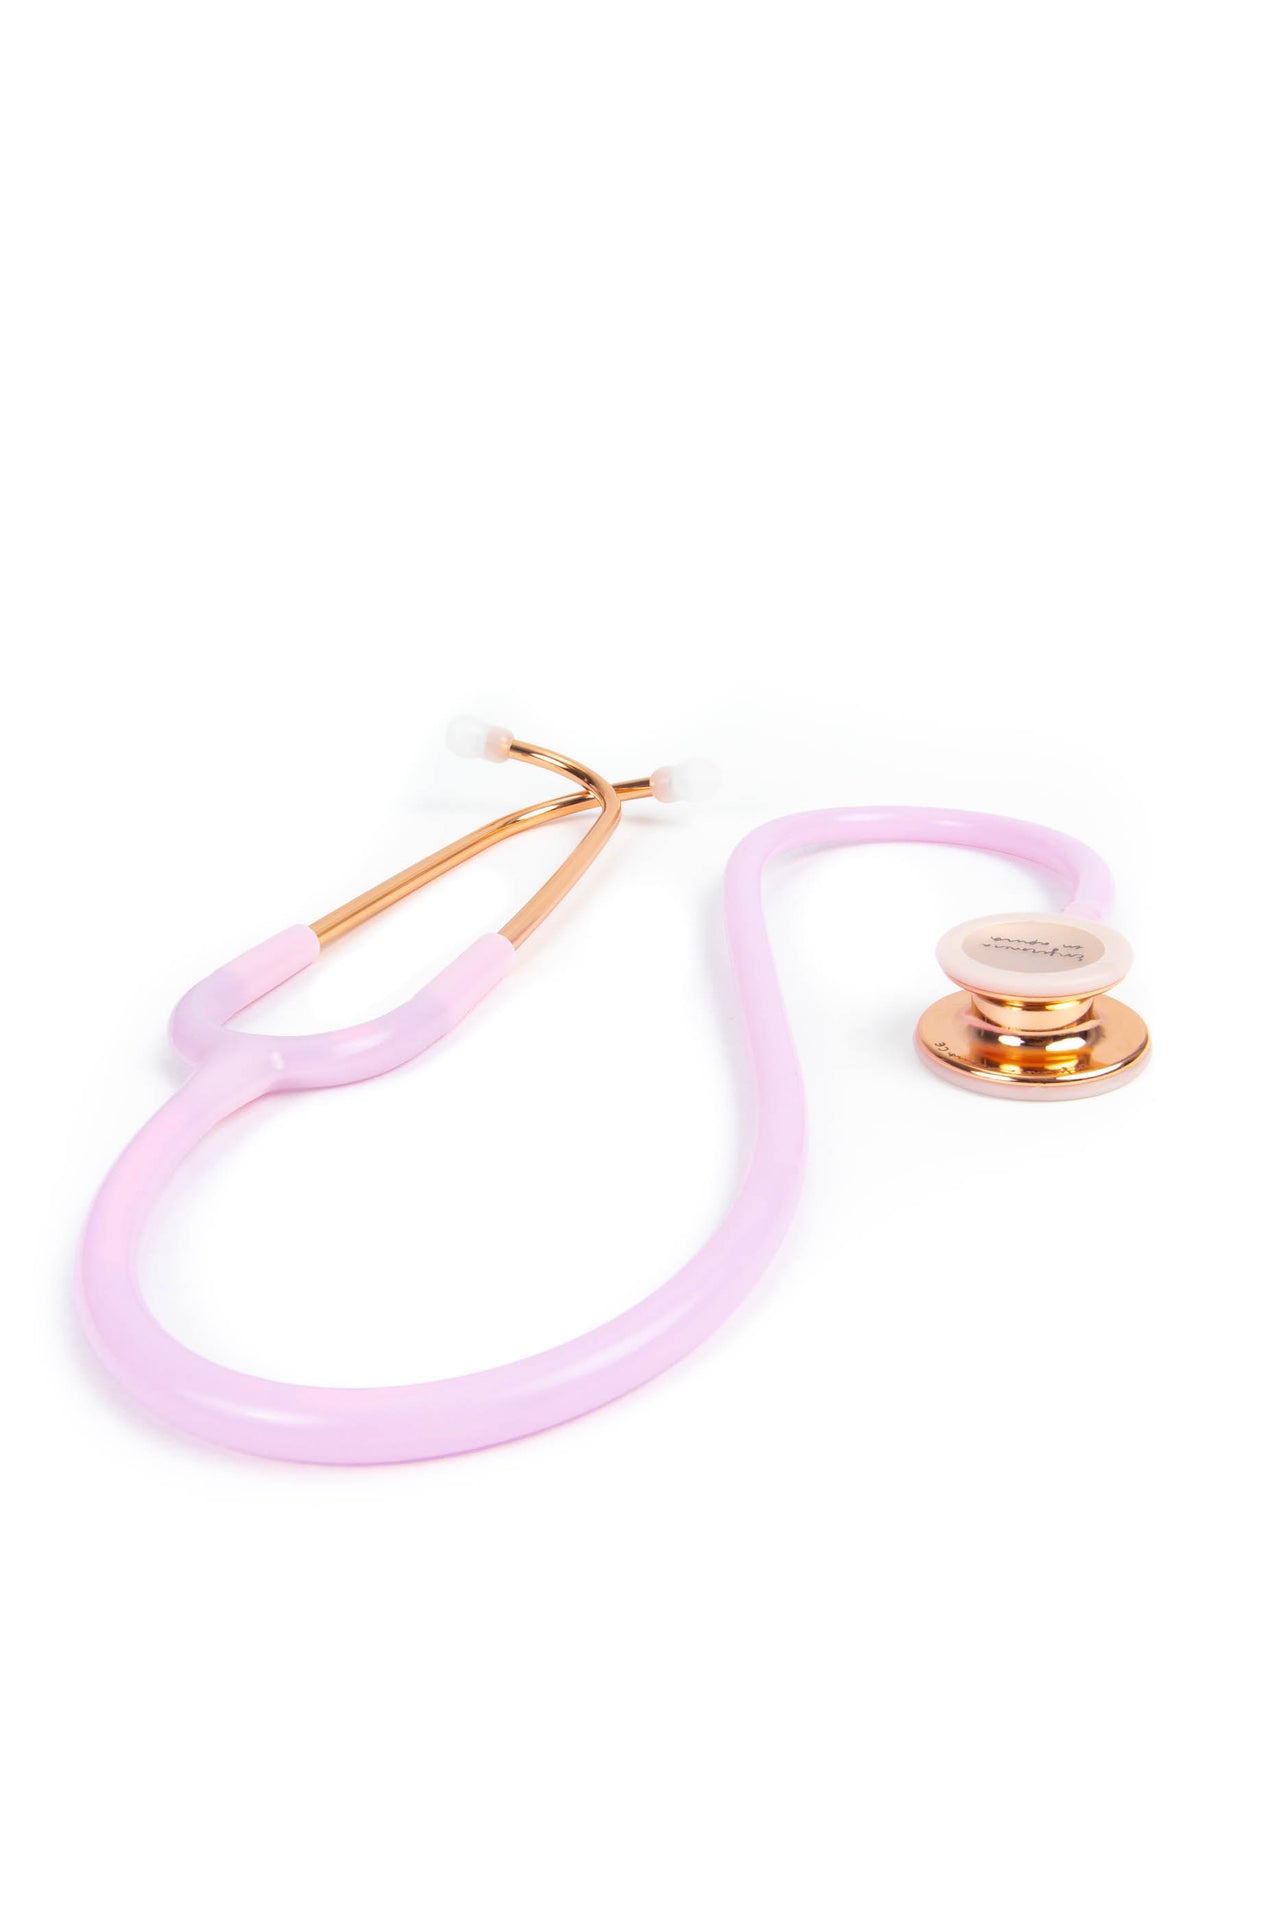 STETHOSCOPE CLASSIC EDITION ROSE GOLD - LAVENDER